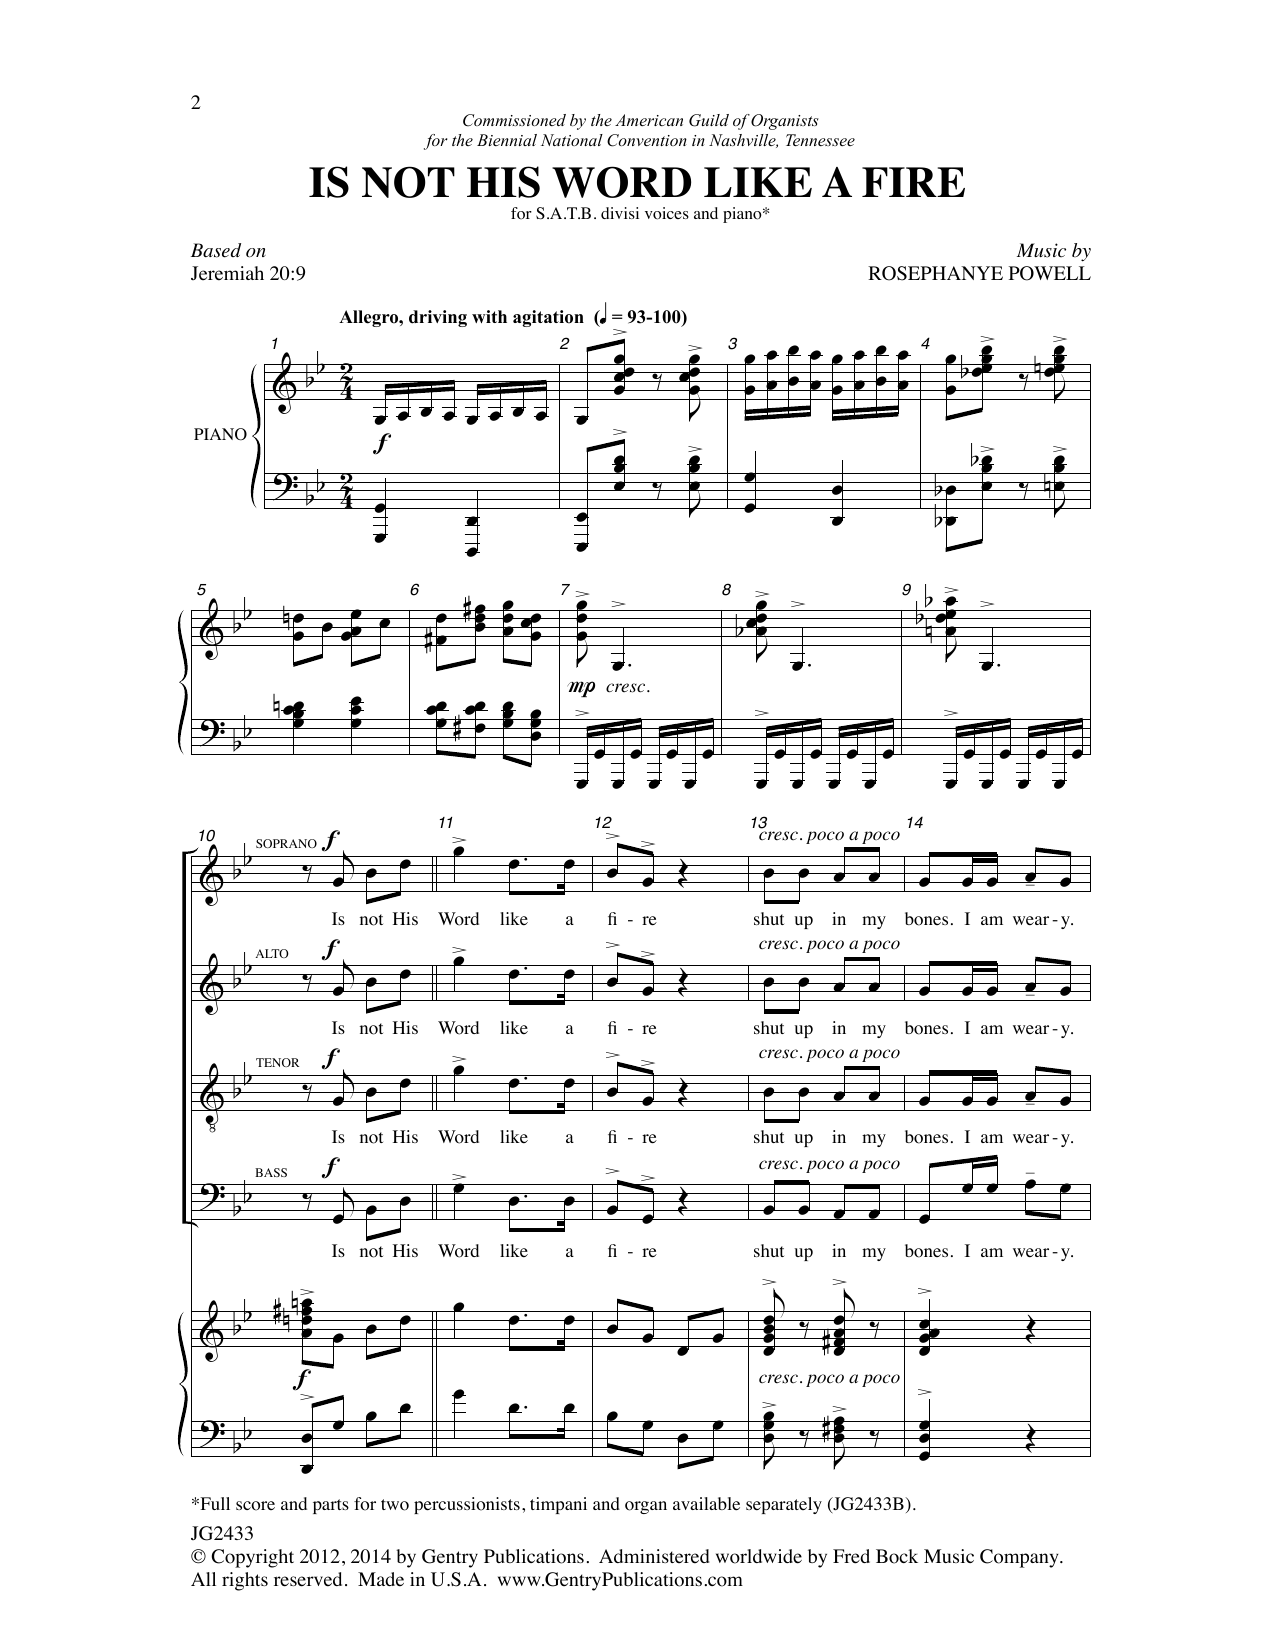 Download Rosephanye Powell Is Not His Word like a Fire Sheet Music